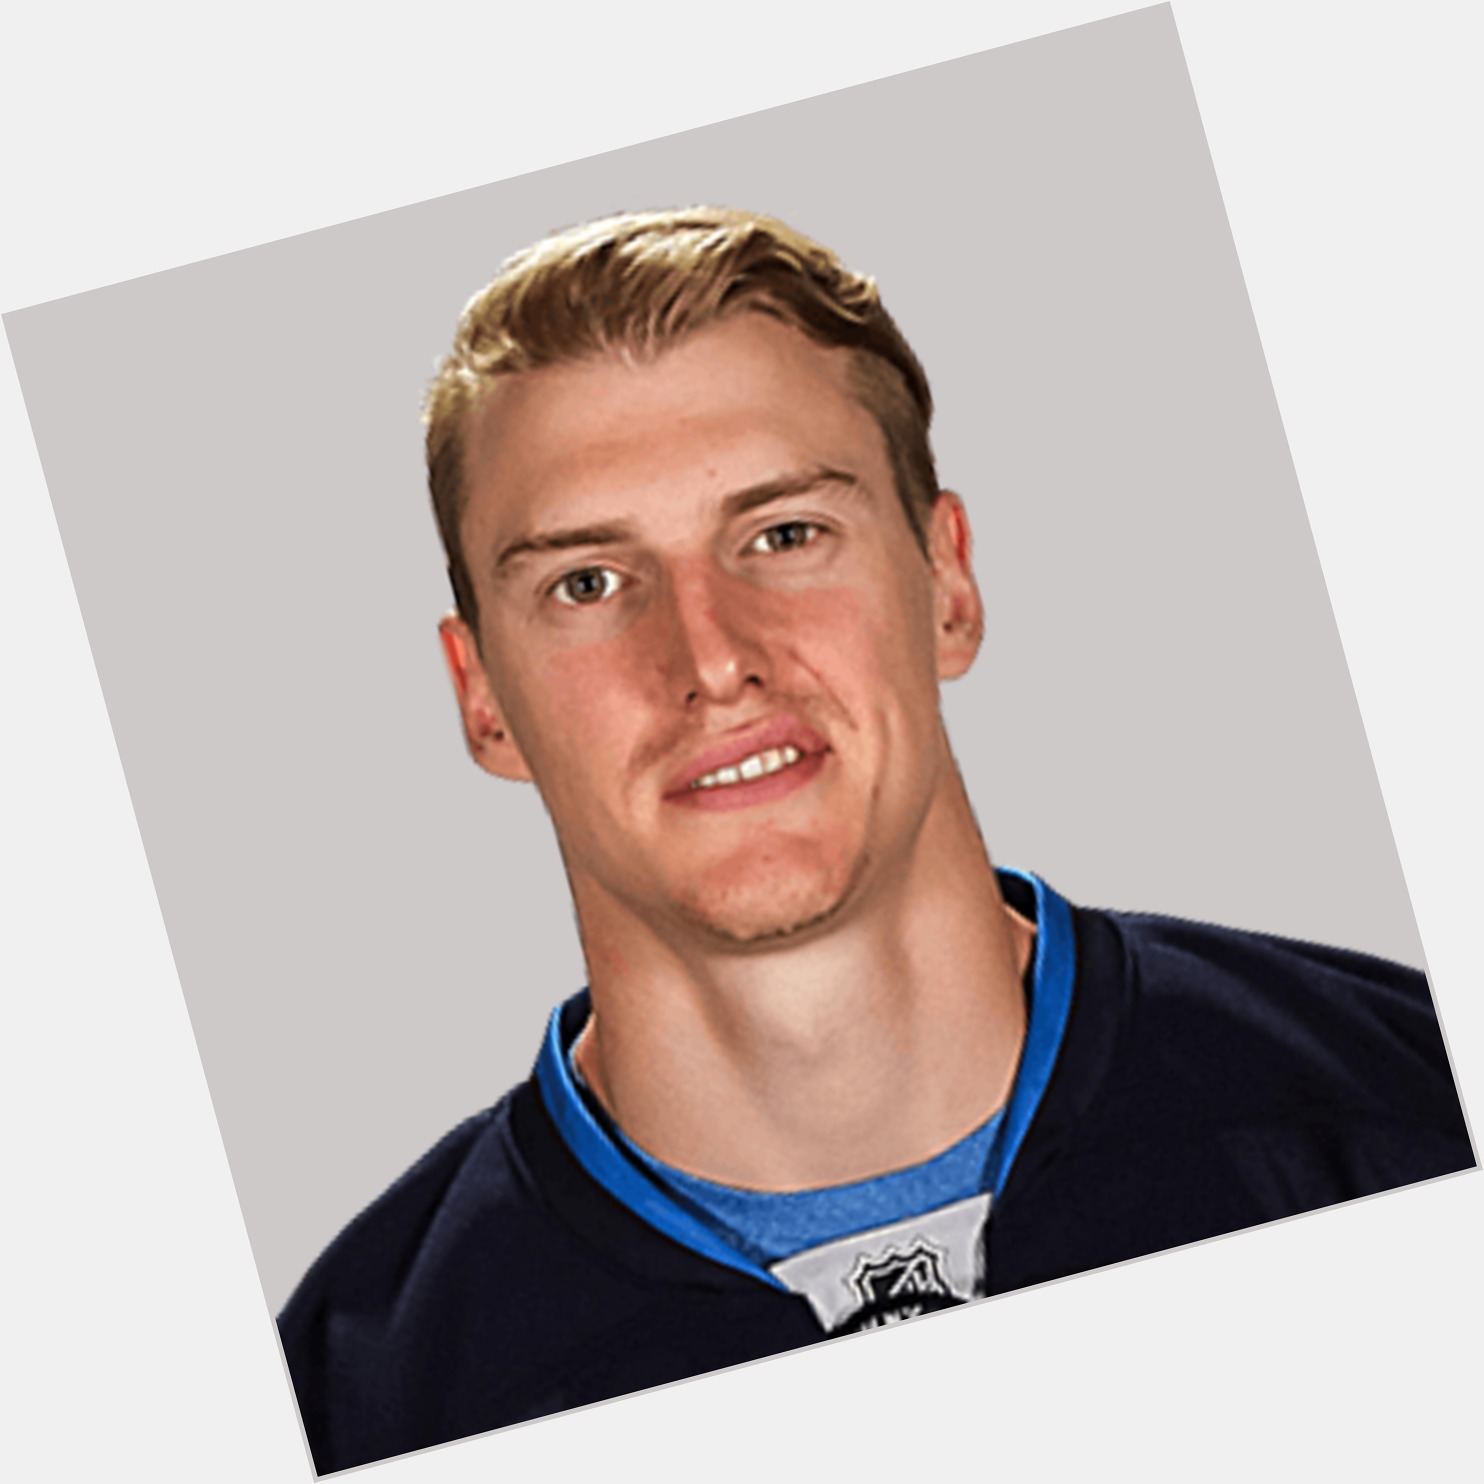 <a href="/hot-men/tyler-myers/where-dating-news-photos">Tyler Myers</a> Athletic body,  light brown hair & hairstyles